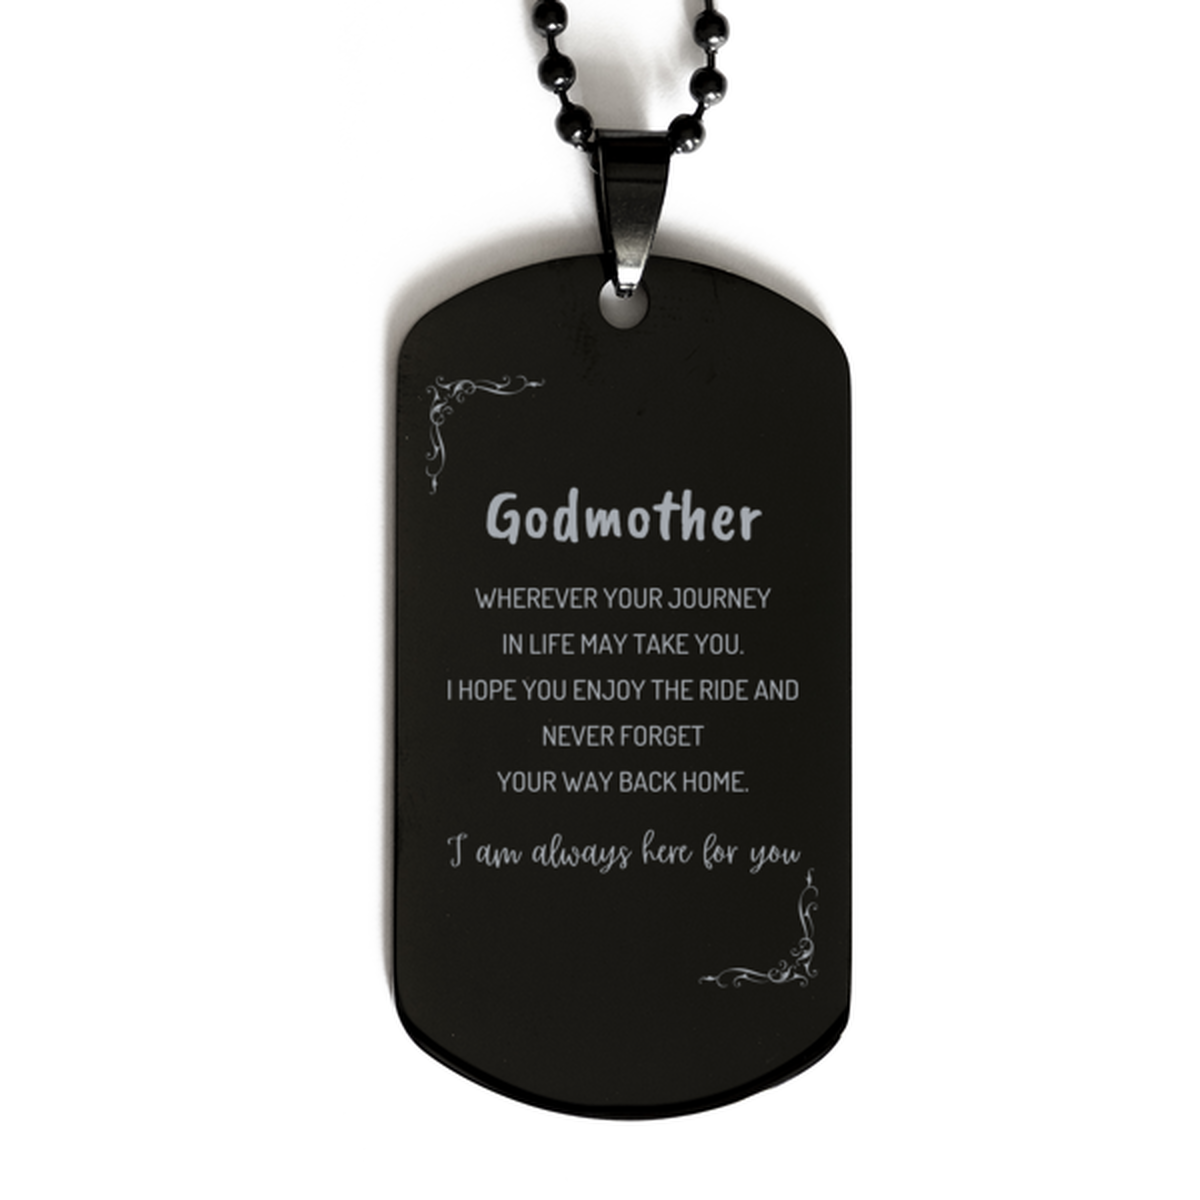 Godmother wherever your journey in life may take you, I am always here for you Godmother Black Dog Tag, Awesome Christmas Gifts For Godmother, Godmother Birthday Gifts for Men Women Family Loved One